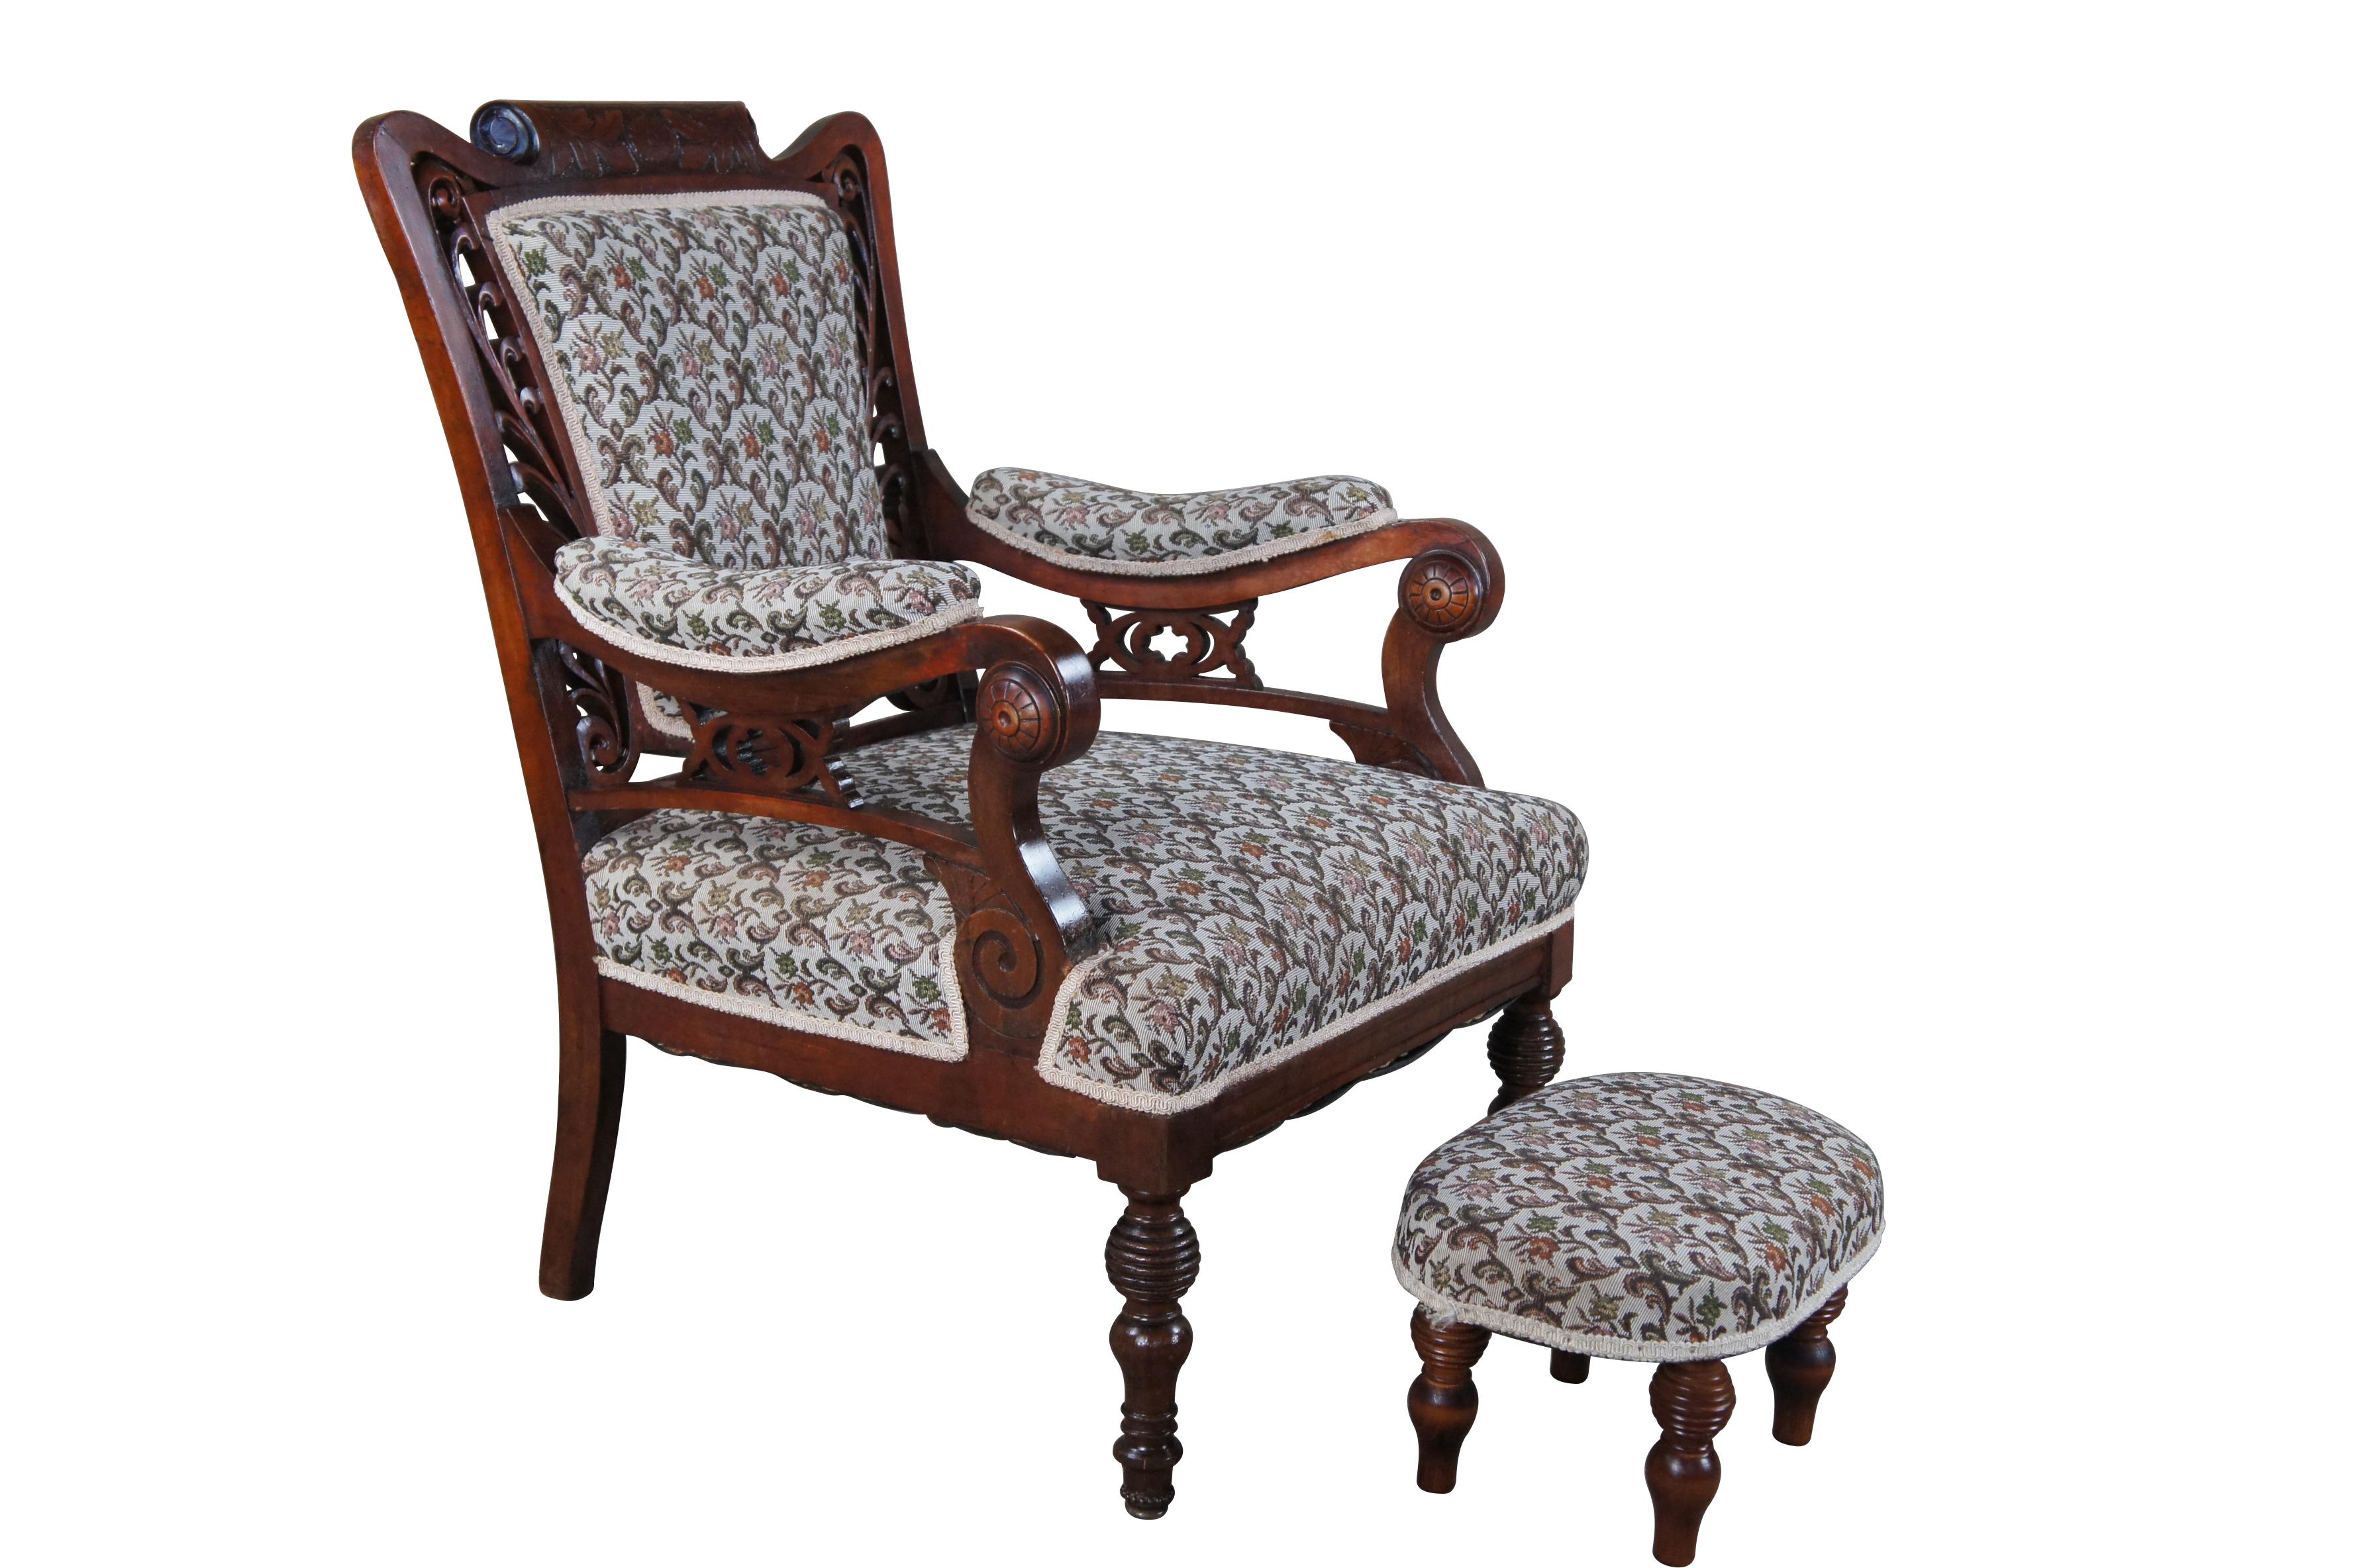 2 Antique Victorian Pierced Carved Walnut Upholstered Library Parlor Club Chairs In Good Condition For Sale In Dayton, OH